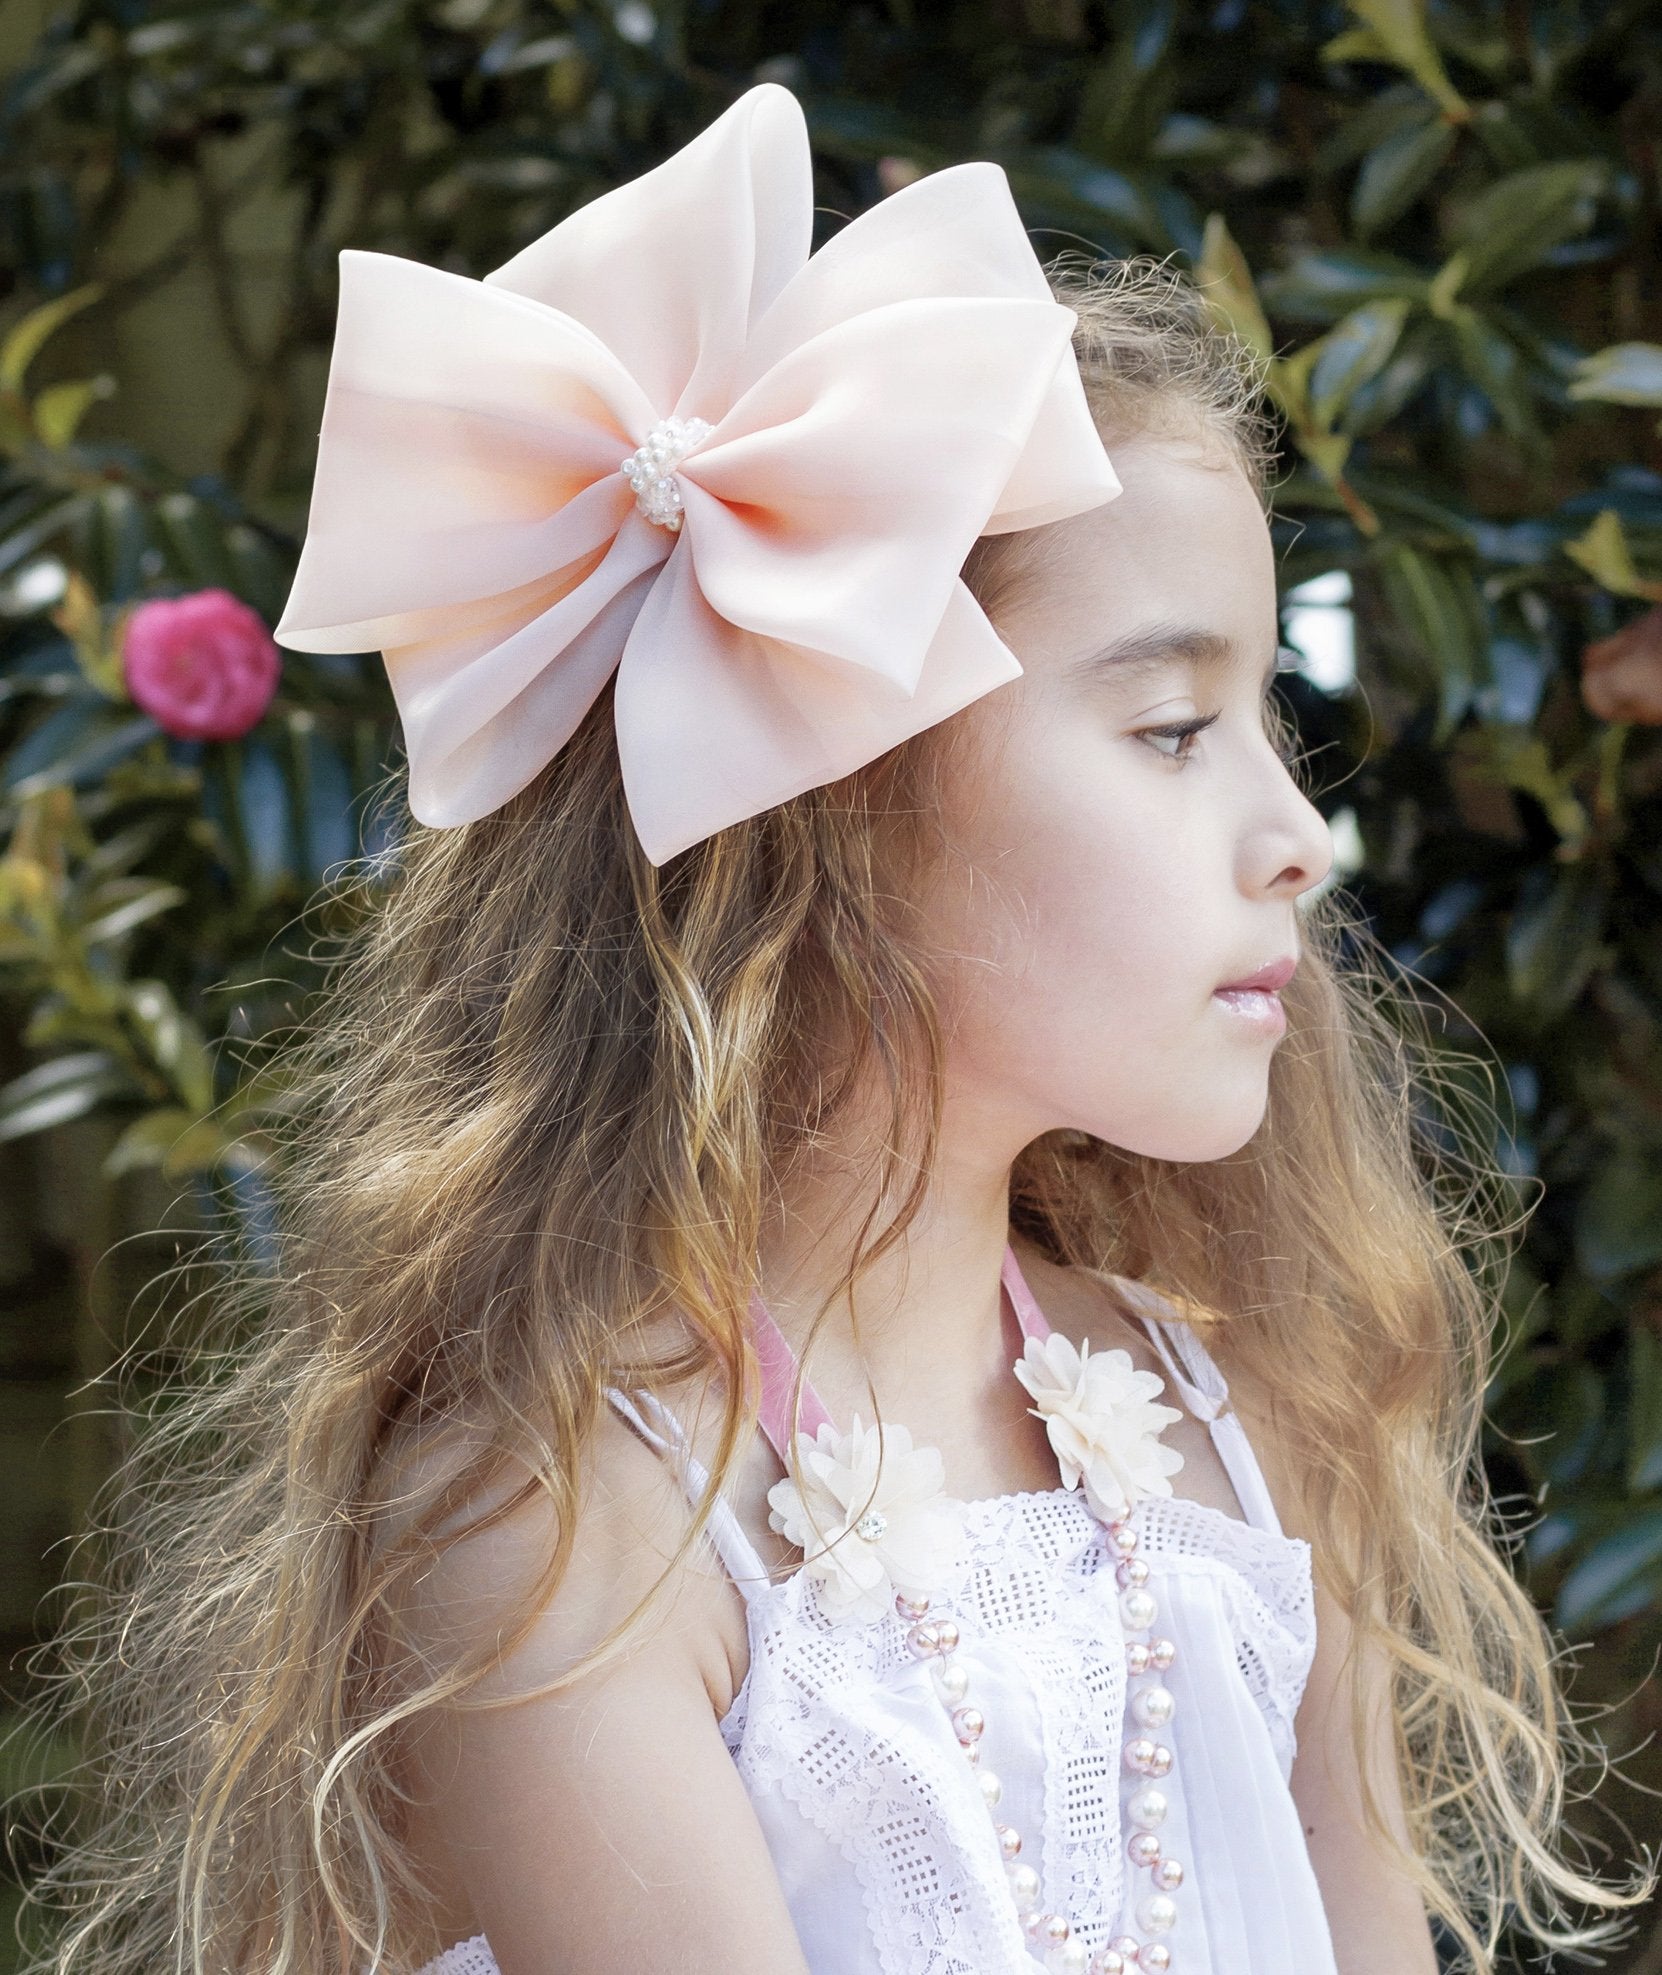 Trending: The Hair Bow...Our top 6 picks for right now!